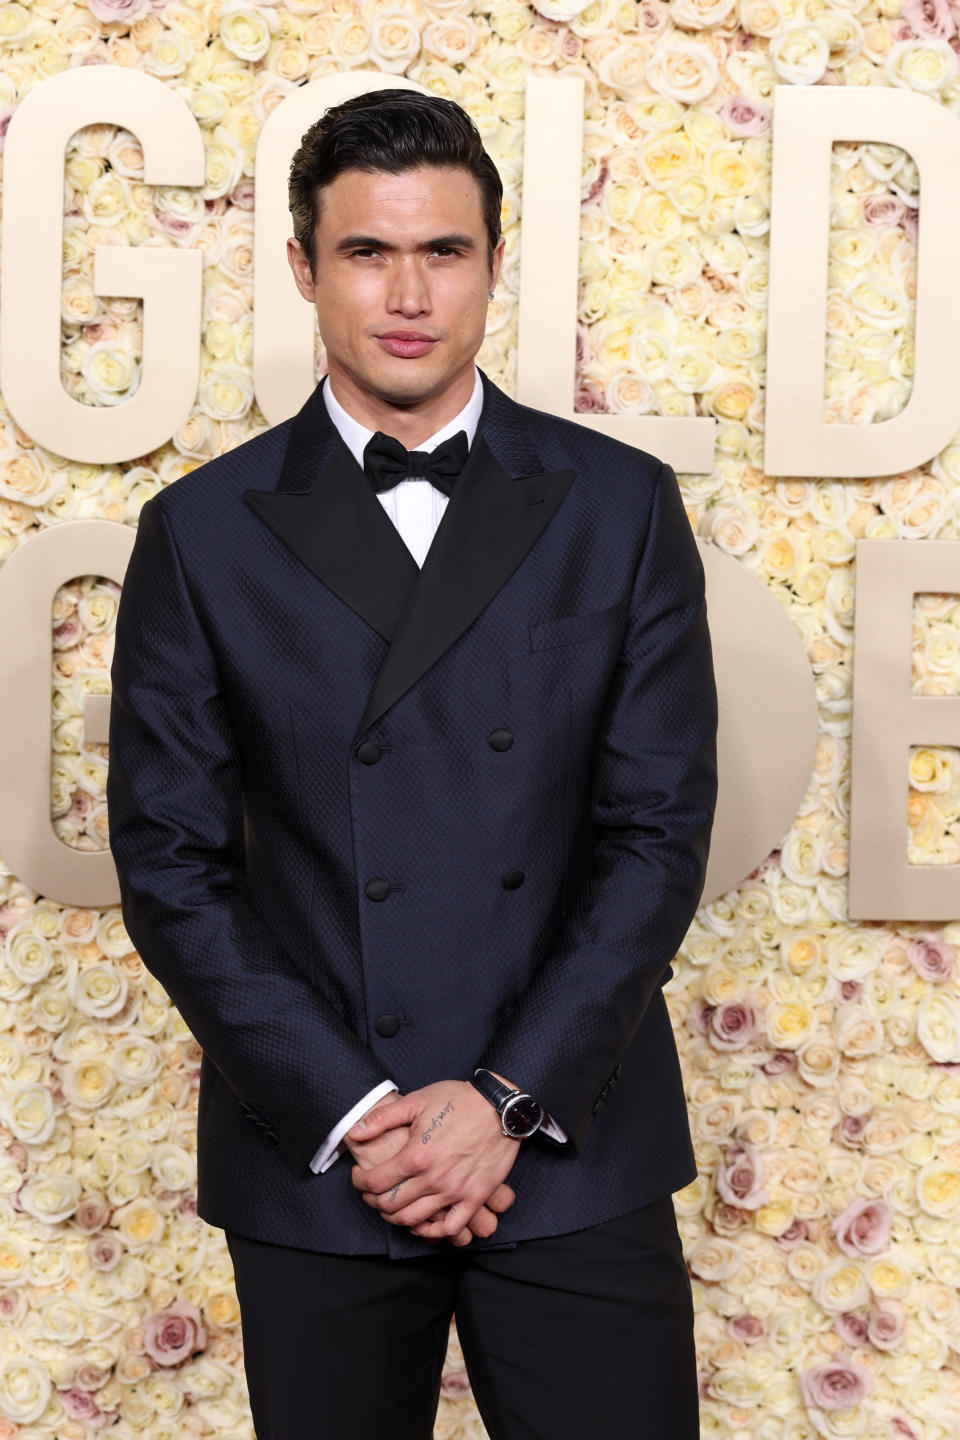 BEVERLY HILLS, CALIFORNIA - JANUARY 07: Charles Melton attends the 81st Annual Golden Globe Awards at The Beverly Hilton on January 07, 2024 in Beverly Hills, California. (Photo by Kevin Mazur/Getty Images)